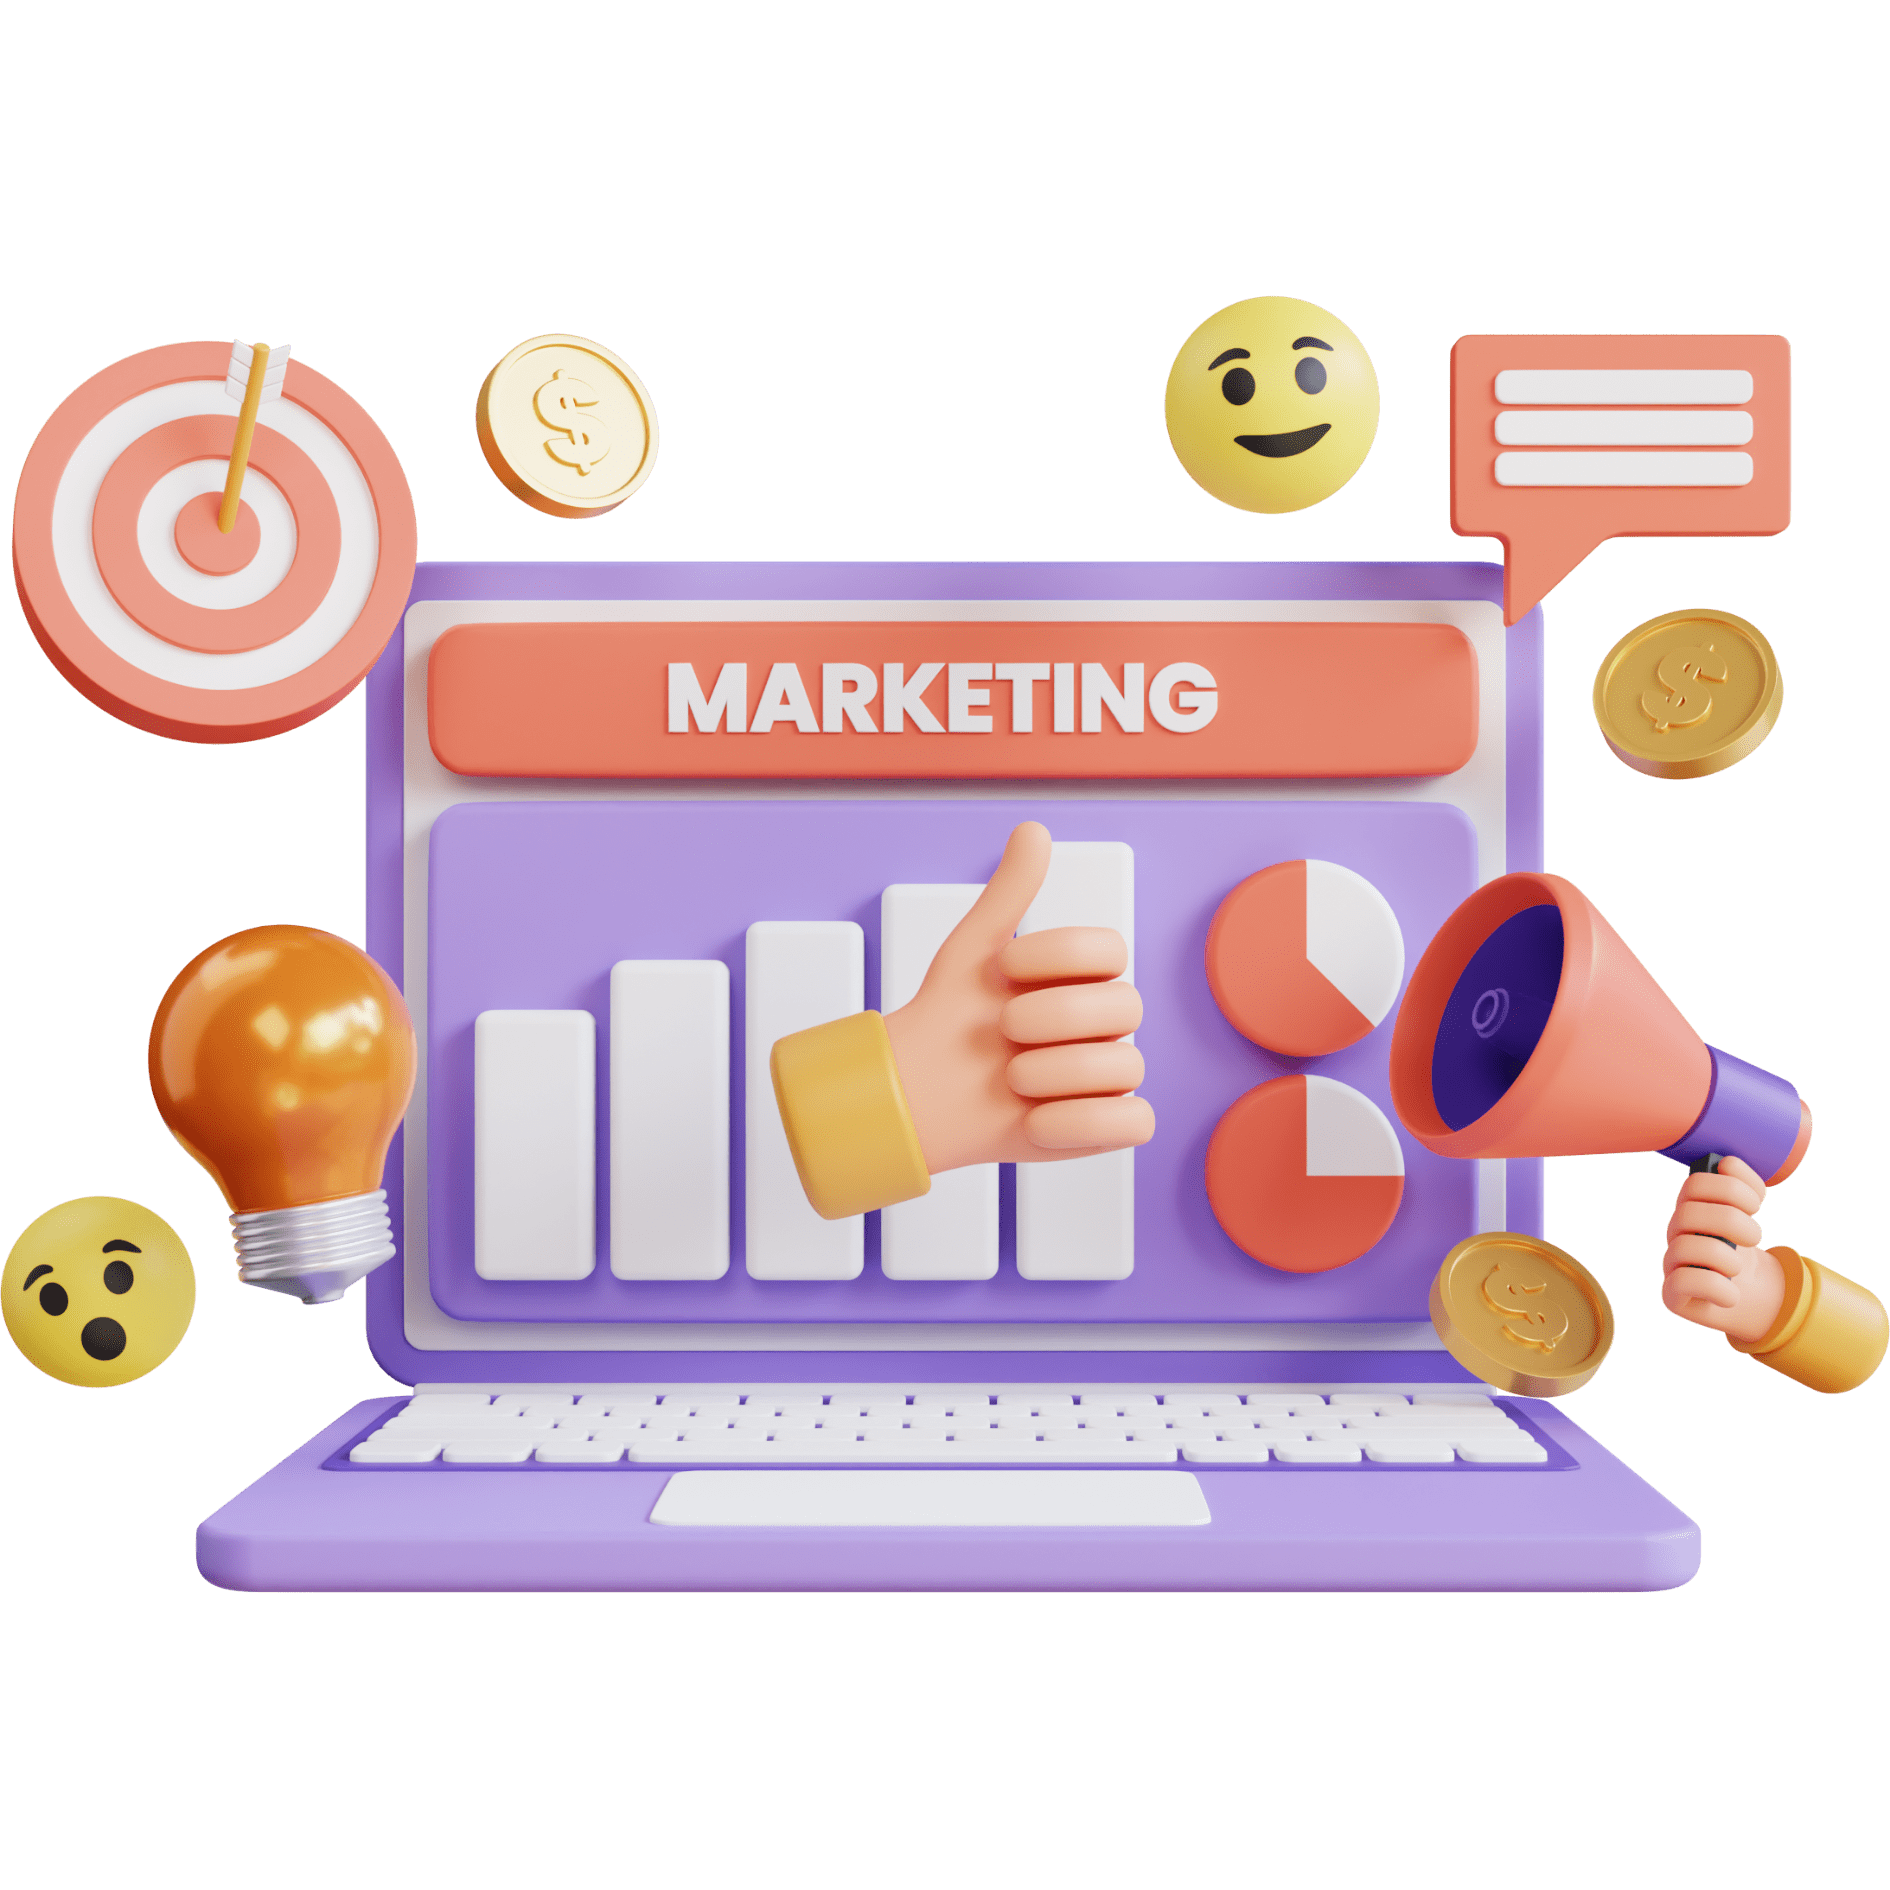 English for Marketing Course